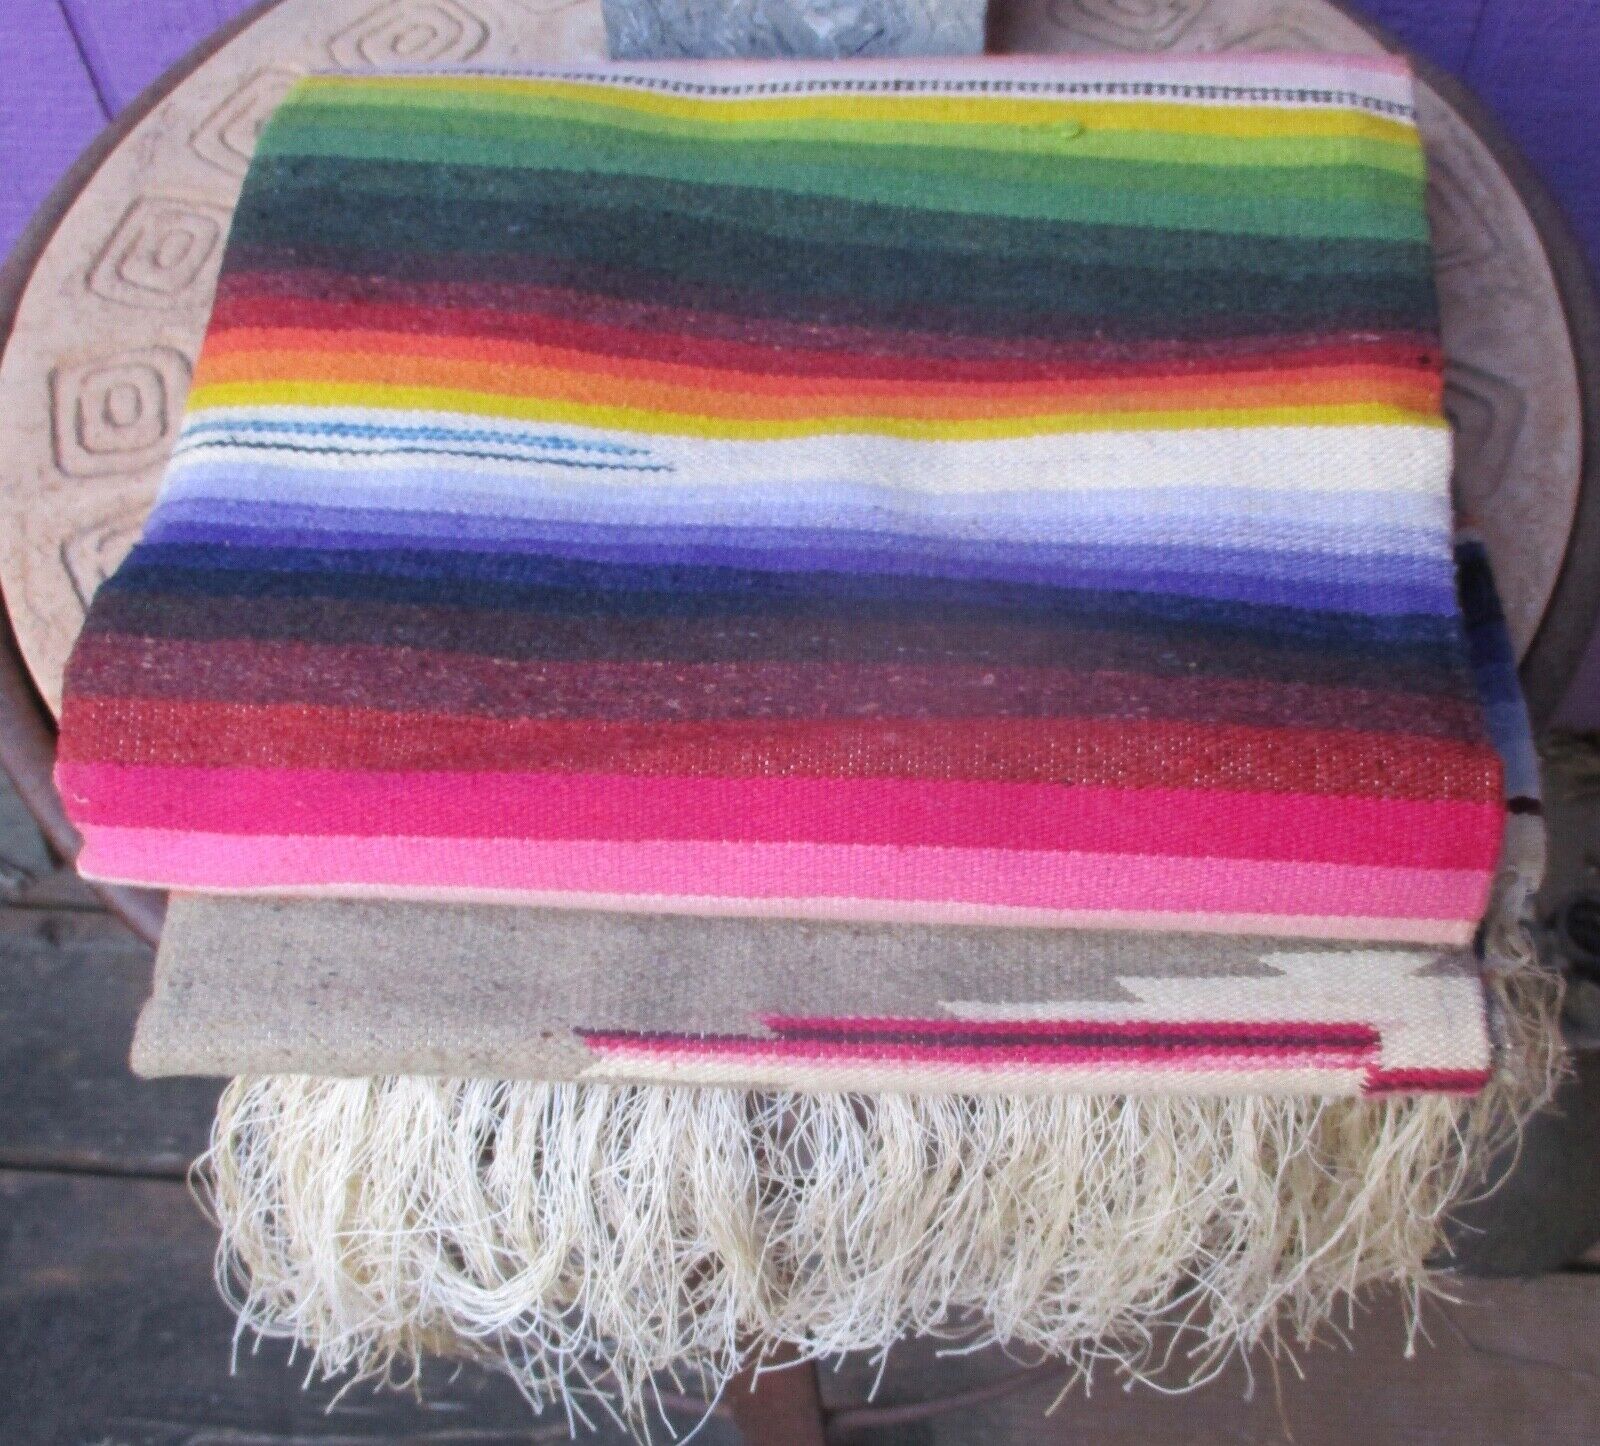 ANTIQUE WOVEN MEXICAN SALTILLO SERAPE WOOL RUG BLANKET WALL HANGING 39 x 77